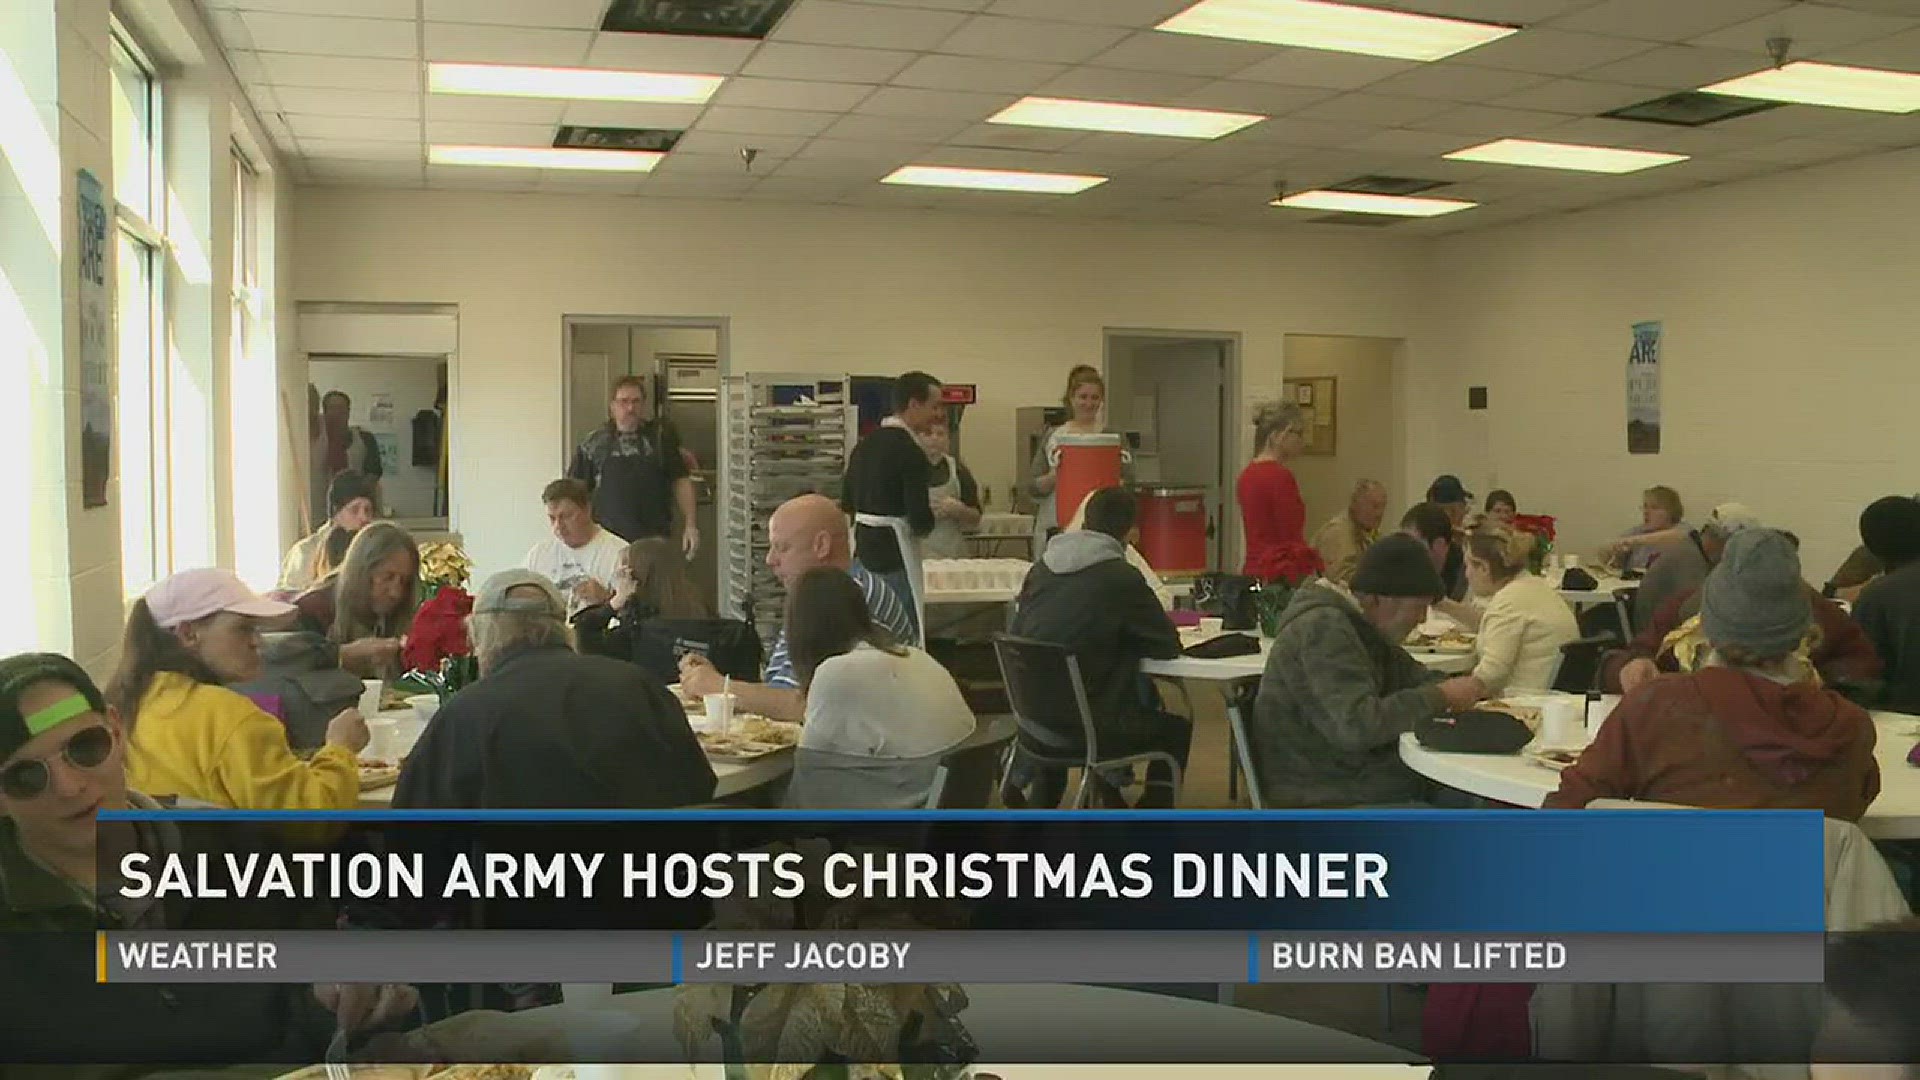 The Salvation Army hosted its Christmas dinner for those in need. For many volunteers, it was their first time helping the homeless.